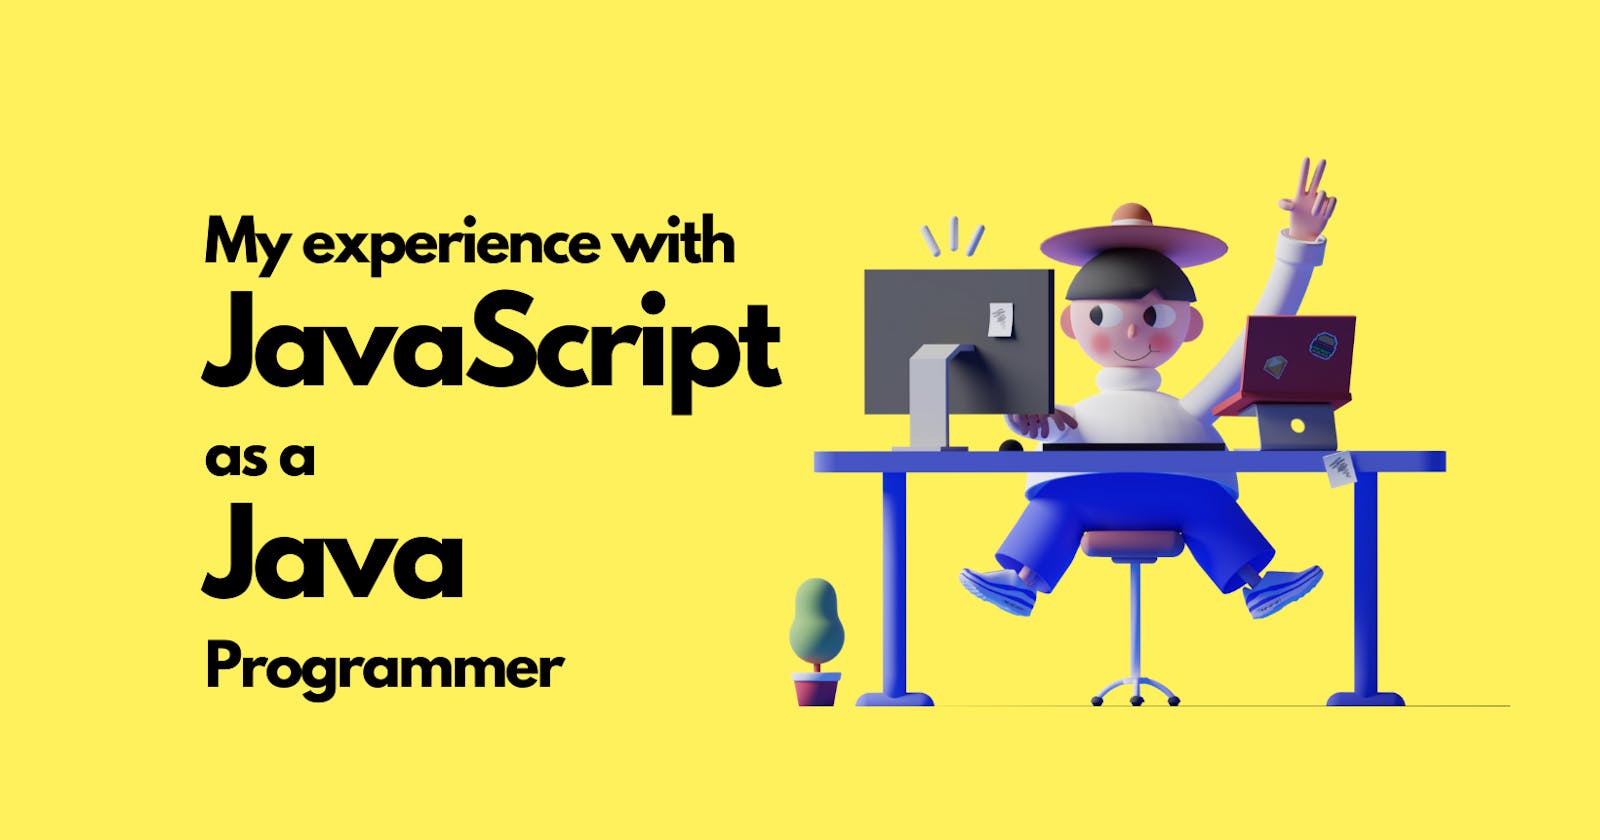 My experience with JavaScript as a Java Programmer